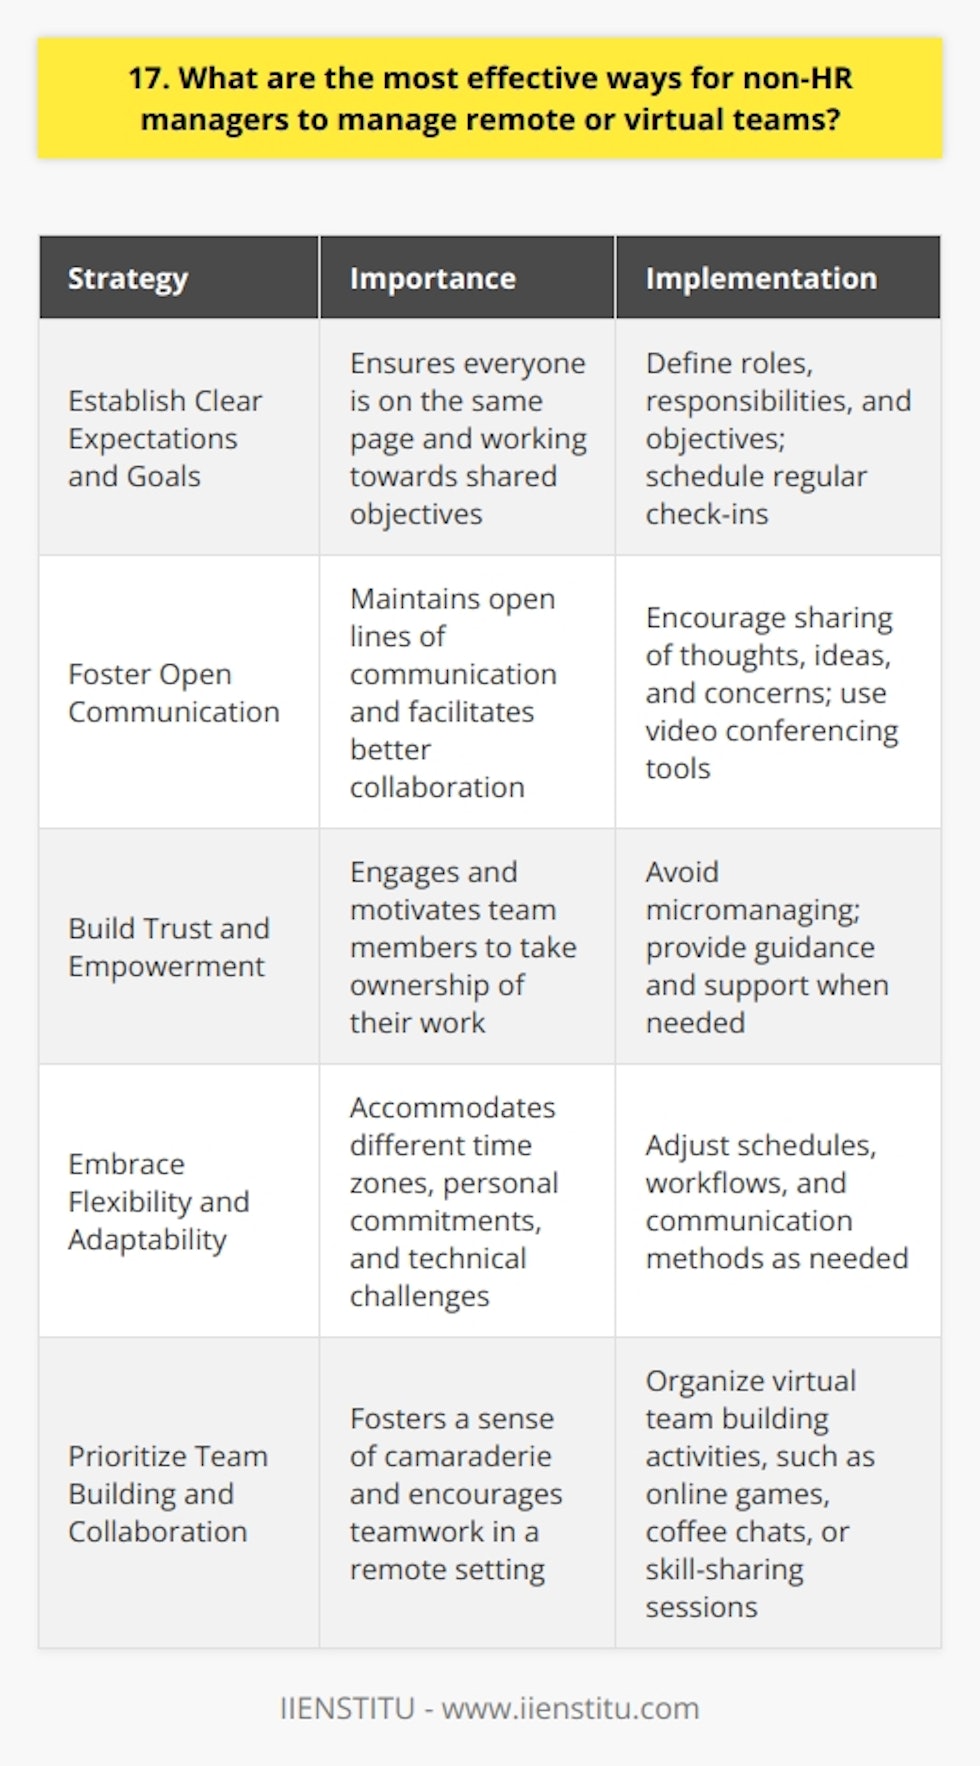 As a non-HR manager, effectively managing remote or virtual teams requires a combination of clear communication, trust, and flexibility. Here are some strategies that Ive found to be successful in my own experience: Establish Clear Expectations and Goals When working with remote teams, its crucial to set clear expectations from the start. This includes defining roles, responsibilities, and objectives for each team member. I like to schedule regular check-ins to ensure everyone is on the same page and making progress towards our shared goals. Foster Open Communication Maintaining open lines of communication is essential for remote teams. Encourage team members to share their thoughts, ideas, and concerns regularly. Ive found that using video conferencing tools like Zoom or Microsoft Teams helps to create a more personal connection and facilitates better communication than relying solely on email or instant messaging. Build Trust and Empowerment Trust is the foundation of any successful remote team. Empower your team members to take ownership of their work and make decisions independently. Avoid micromanaging and instead focus on providing guidance and support when needed. I believe that when team members feel trusted and empowered, they are more engaged and productive. Embrace Flexibility and Adaptability Remote work often requires a level of flexibility from both managers and team members. Be open to adjusting schedules, workflows, and communication methods as needed to accommodate different time zones, personal commitments, or technical challenges. In my experience, being adaptable and understanding helps to create a positive and supportive team culture. Prioritize Team Building and Collaboration Just because a team is remote doesnt mean they cant form strong bonds and work collaboratively. Make an effort to organize virtual team building activities, such as online games, coffee chats, or skill-sharing sessions. These activities help to foster a sense of camaraderie and encourage teamwork, even when everyone is working from different locations. Managing remote teams effectively requires a proactive approach, strong leadership skills, and a willingness to adapt to new ways of working. By prioritizing communication, trust, and flexibility, non-HR managers can successfully lead their virtual teams to achieve their goals and thrive in a remote work environment.